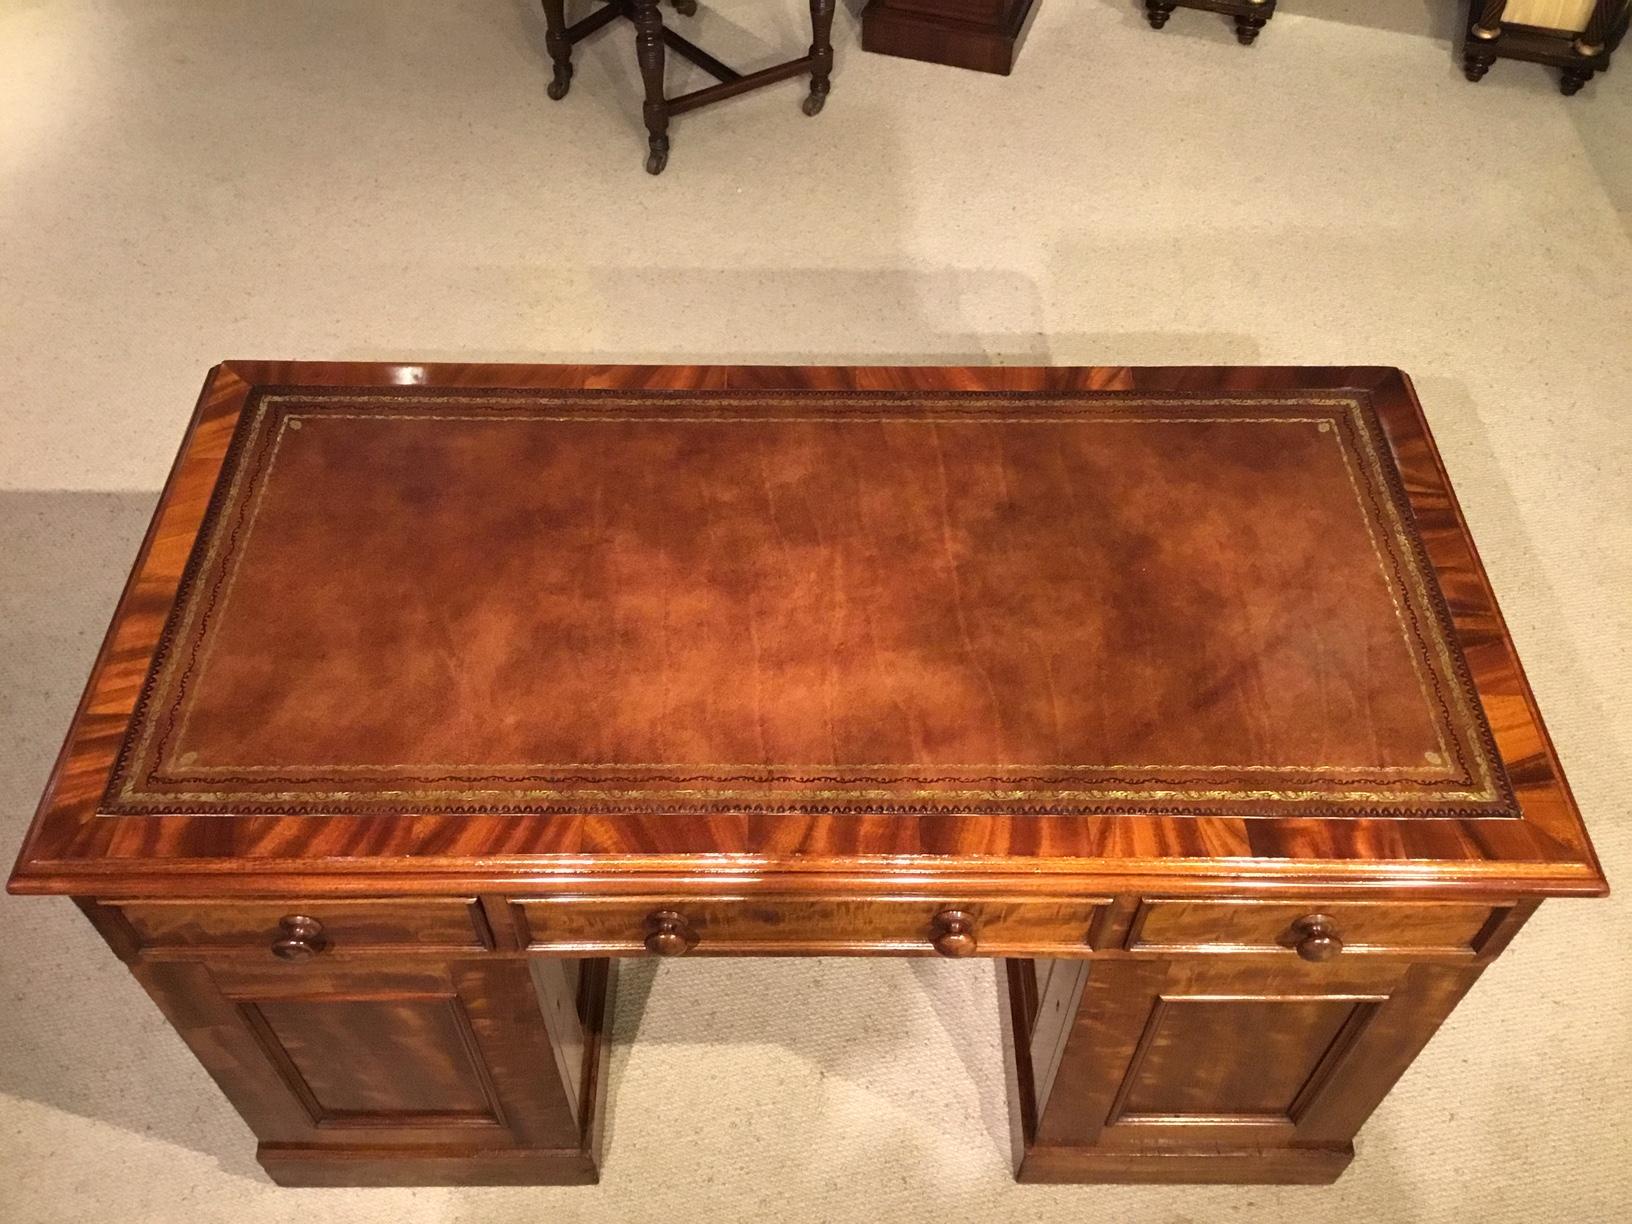 A figured mahogany Victorian period antique writing desk. Having a rectangular top with a tan inset leather writing surface with blind and gilt tooled detail, cross banded in mahogany and with a moulded edge. With an arrangement of three drawers and